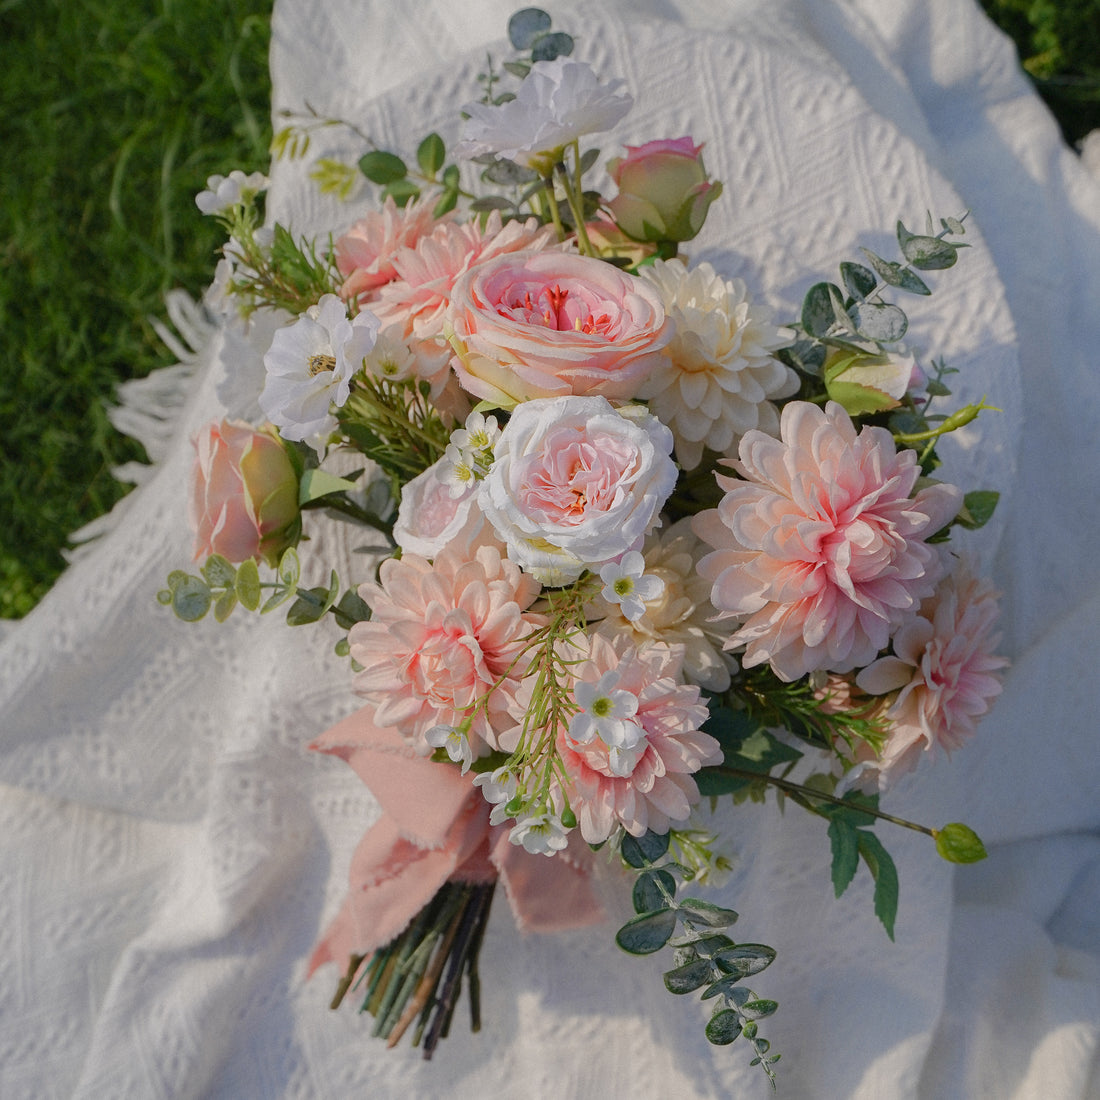 This pink fantasy wedding bouquet is the perfect accompaniment to any wedding. It is made of high quality flowers including pink roses, pink hydrangeas and pink daisies. The bouquet is decorated with ribbons and lace, very elegant. It is the perfect accessory for any bride and is sure to make her the center of attention at her wedding.